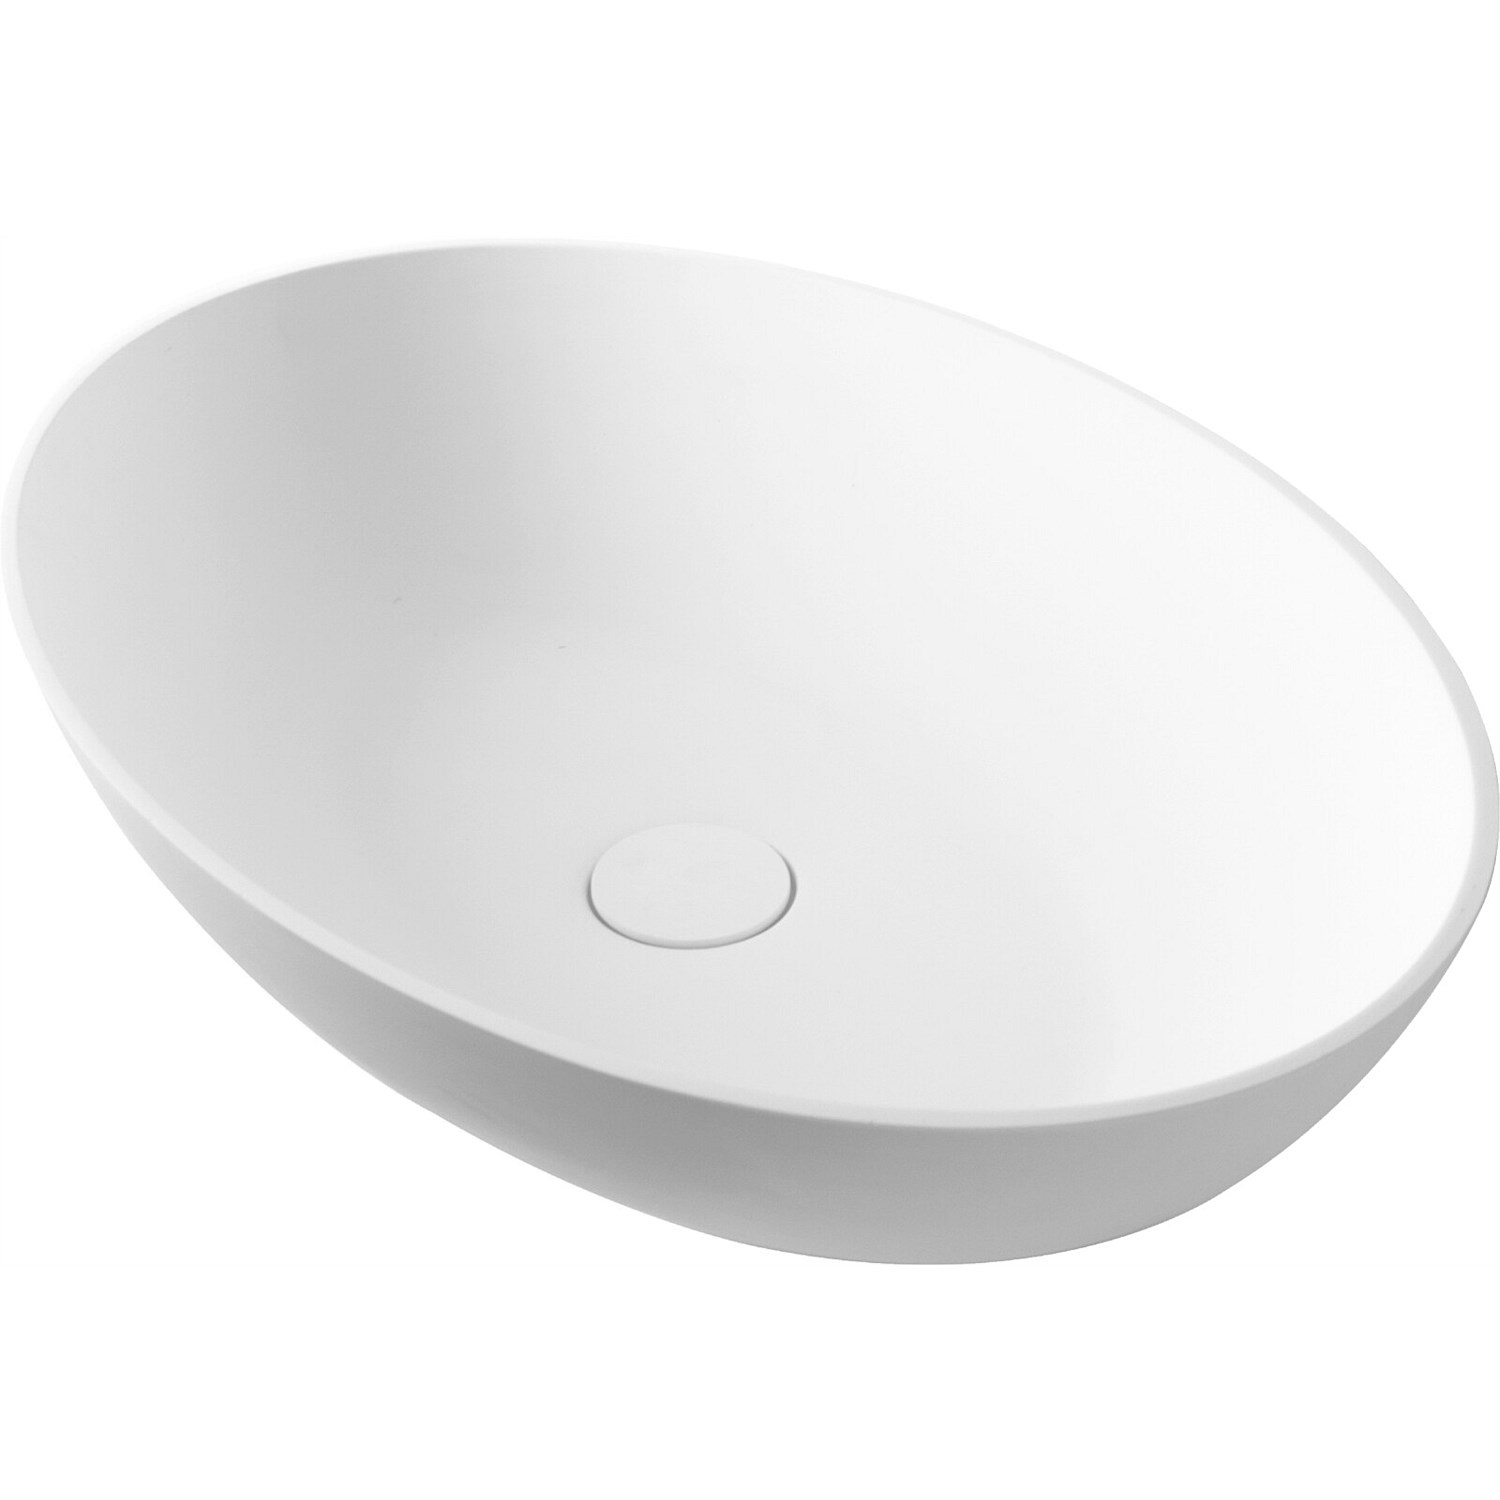 Counter-Tops and Vessels - LeVivi Capri Oval Solid Surface Basin White